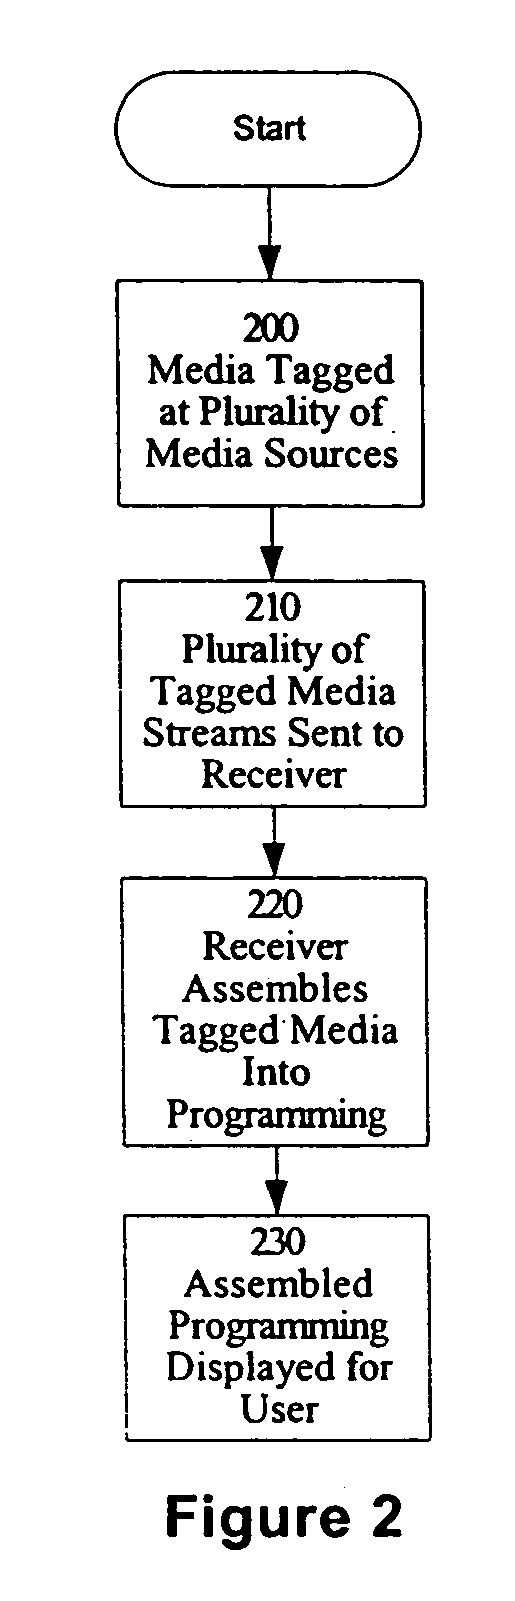 Method and apparatus for creation, distribution, assembly and verification of media